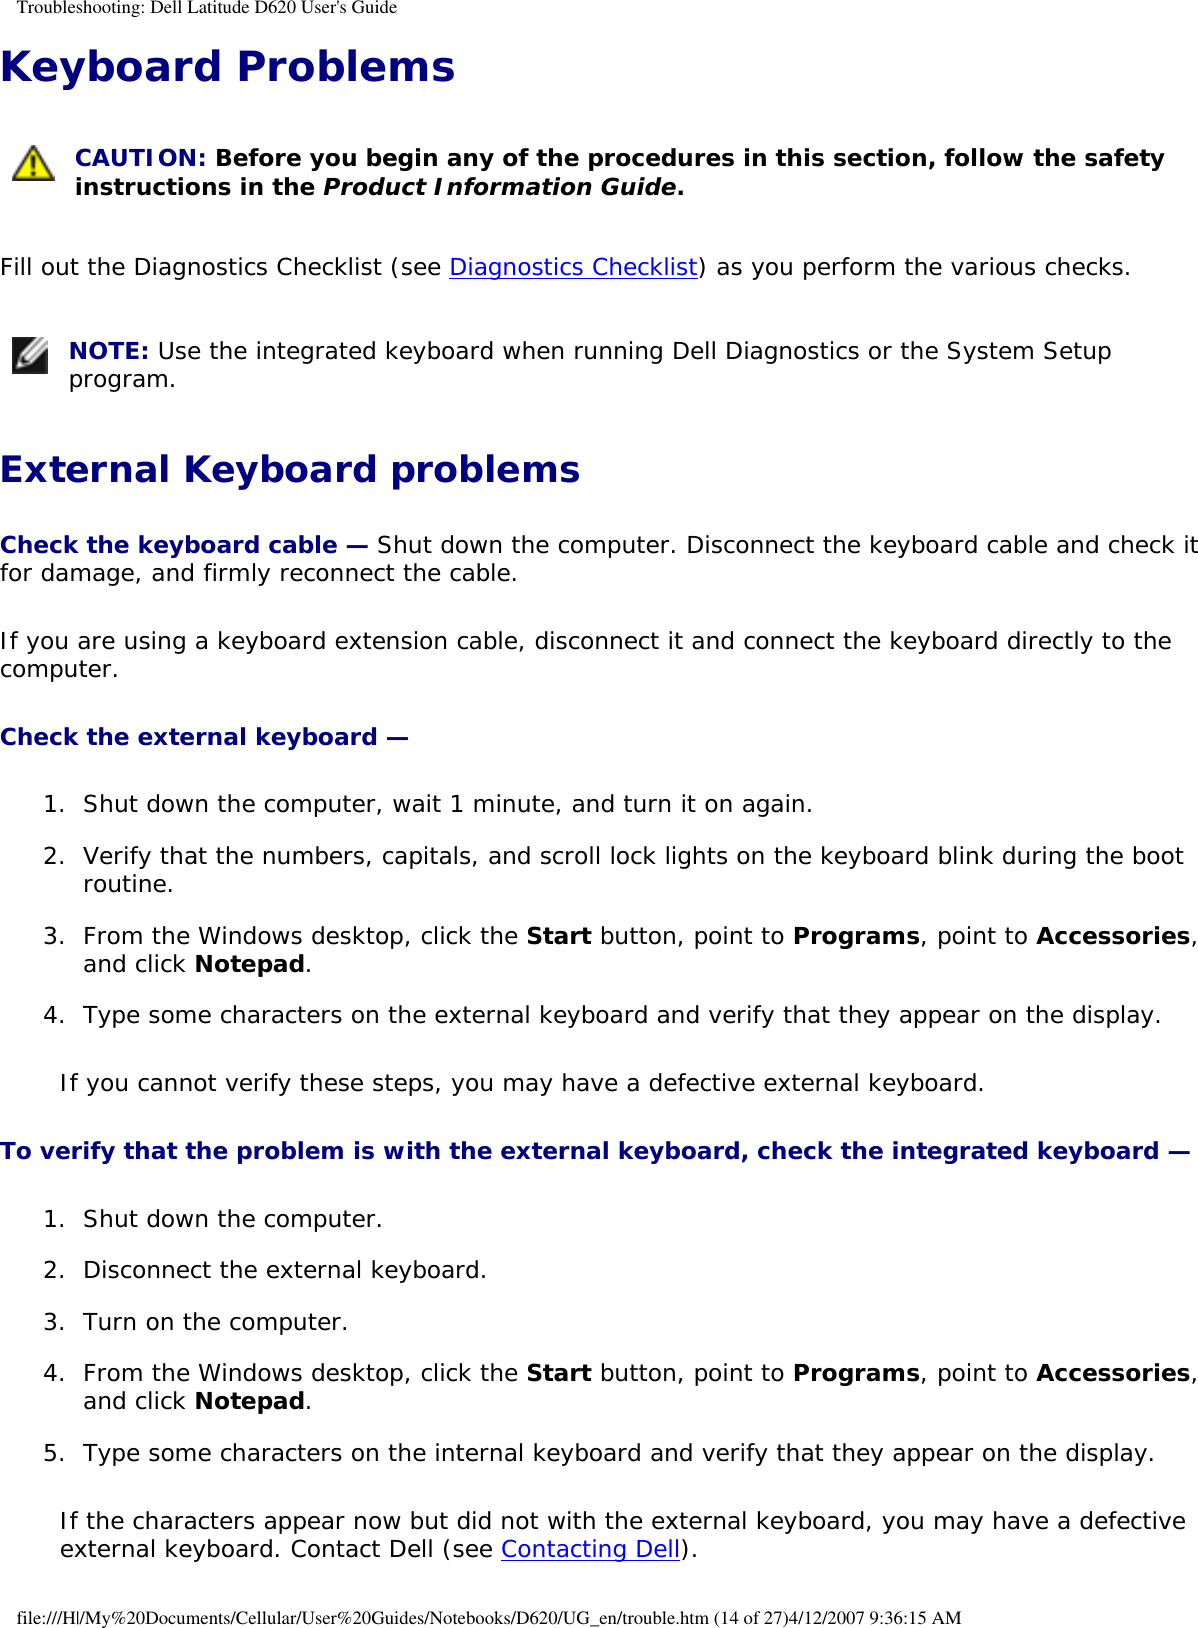 Troubleshooting: Dell Latitude D620 User&apos;s GuideKeyboard Problems  CAUTION: Before you begin any of the procedures in this section, follow the safety instructions in the Product Information Guide.Fill out the Diagnostics Checklist (see Diagnostics Checklist) as you perform the various checks. NOTE: Use the integrated keyboard when running Dell Diagnostics or the System Setup program.External Keyboard problemsCheck the keyboard cable — Shut down the computer. Disconnect the keyboard cable and check it for damage, and firmly reconnect the cable.If you are using a keyboard extension cable, disconnect it and connect the keyboard directly to the computer.Check the external keyboard — 1.  Shut down the computer, wait 1 minute, and turn it on again.   2.  Verify that the numbers, capitals, and scroll lock lights on the keyboard blink during the boot routine.   3.  From the Windows desktop, click the Start button, point to Programs, point to Accessories, and click Notepad.   4.  Type some characters on the external keyboard and verify that they appear on the display.   If you cannot verify these steps, you may have a defective external keyboard. To verify that the problem is with the external keyboard, check the integrated keyboard — 1.  Shut down the computer.   2.  Disconnect the external keyboard.   3.  Turn on the computer.   4.  From the Windows desktop, click the Start button, point to Programs, point to Accessories, and click Notepad.   5.  Type some characters on the internal keyboard and verify that they appear on the display.   If the characters appear now but did not with the external keyboard, you may have a defective external keyboard. Contact Dell (see Contacting Dell).file:///H|/My%20Documents/Cellular/User%20Guides/Notebooks/D620/UG_en/trouble.htm (14 of 27)4/12/2007 9:36:15 AM